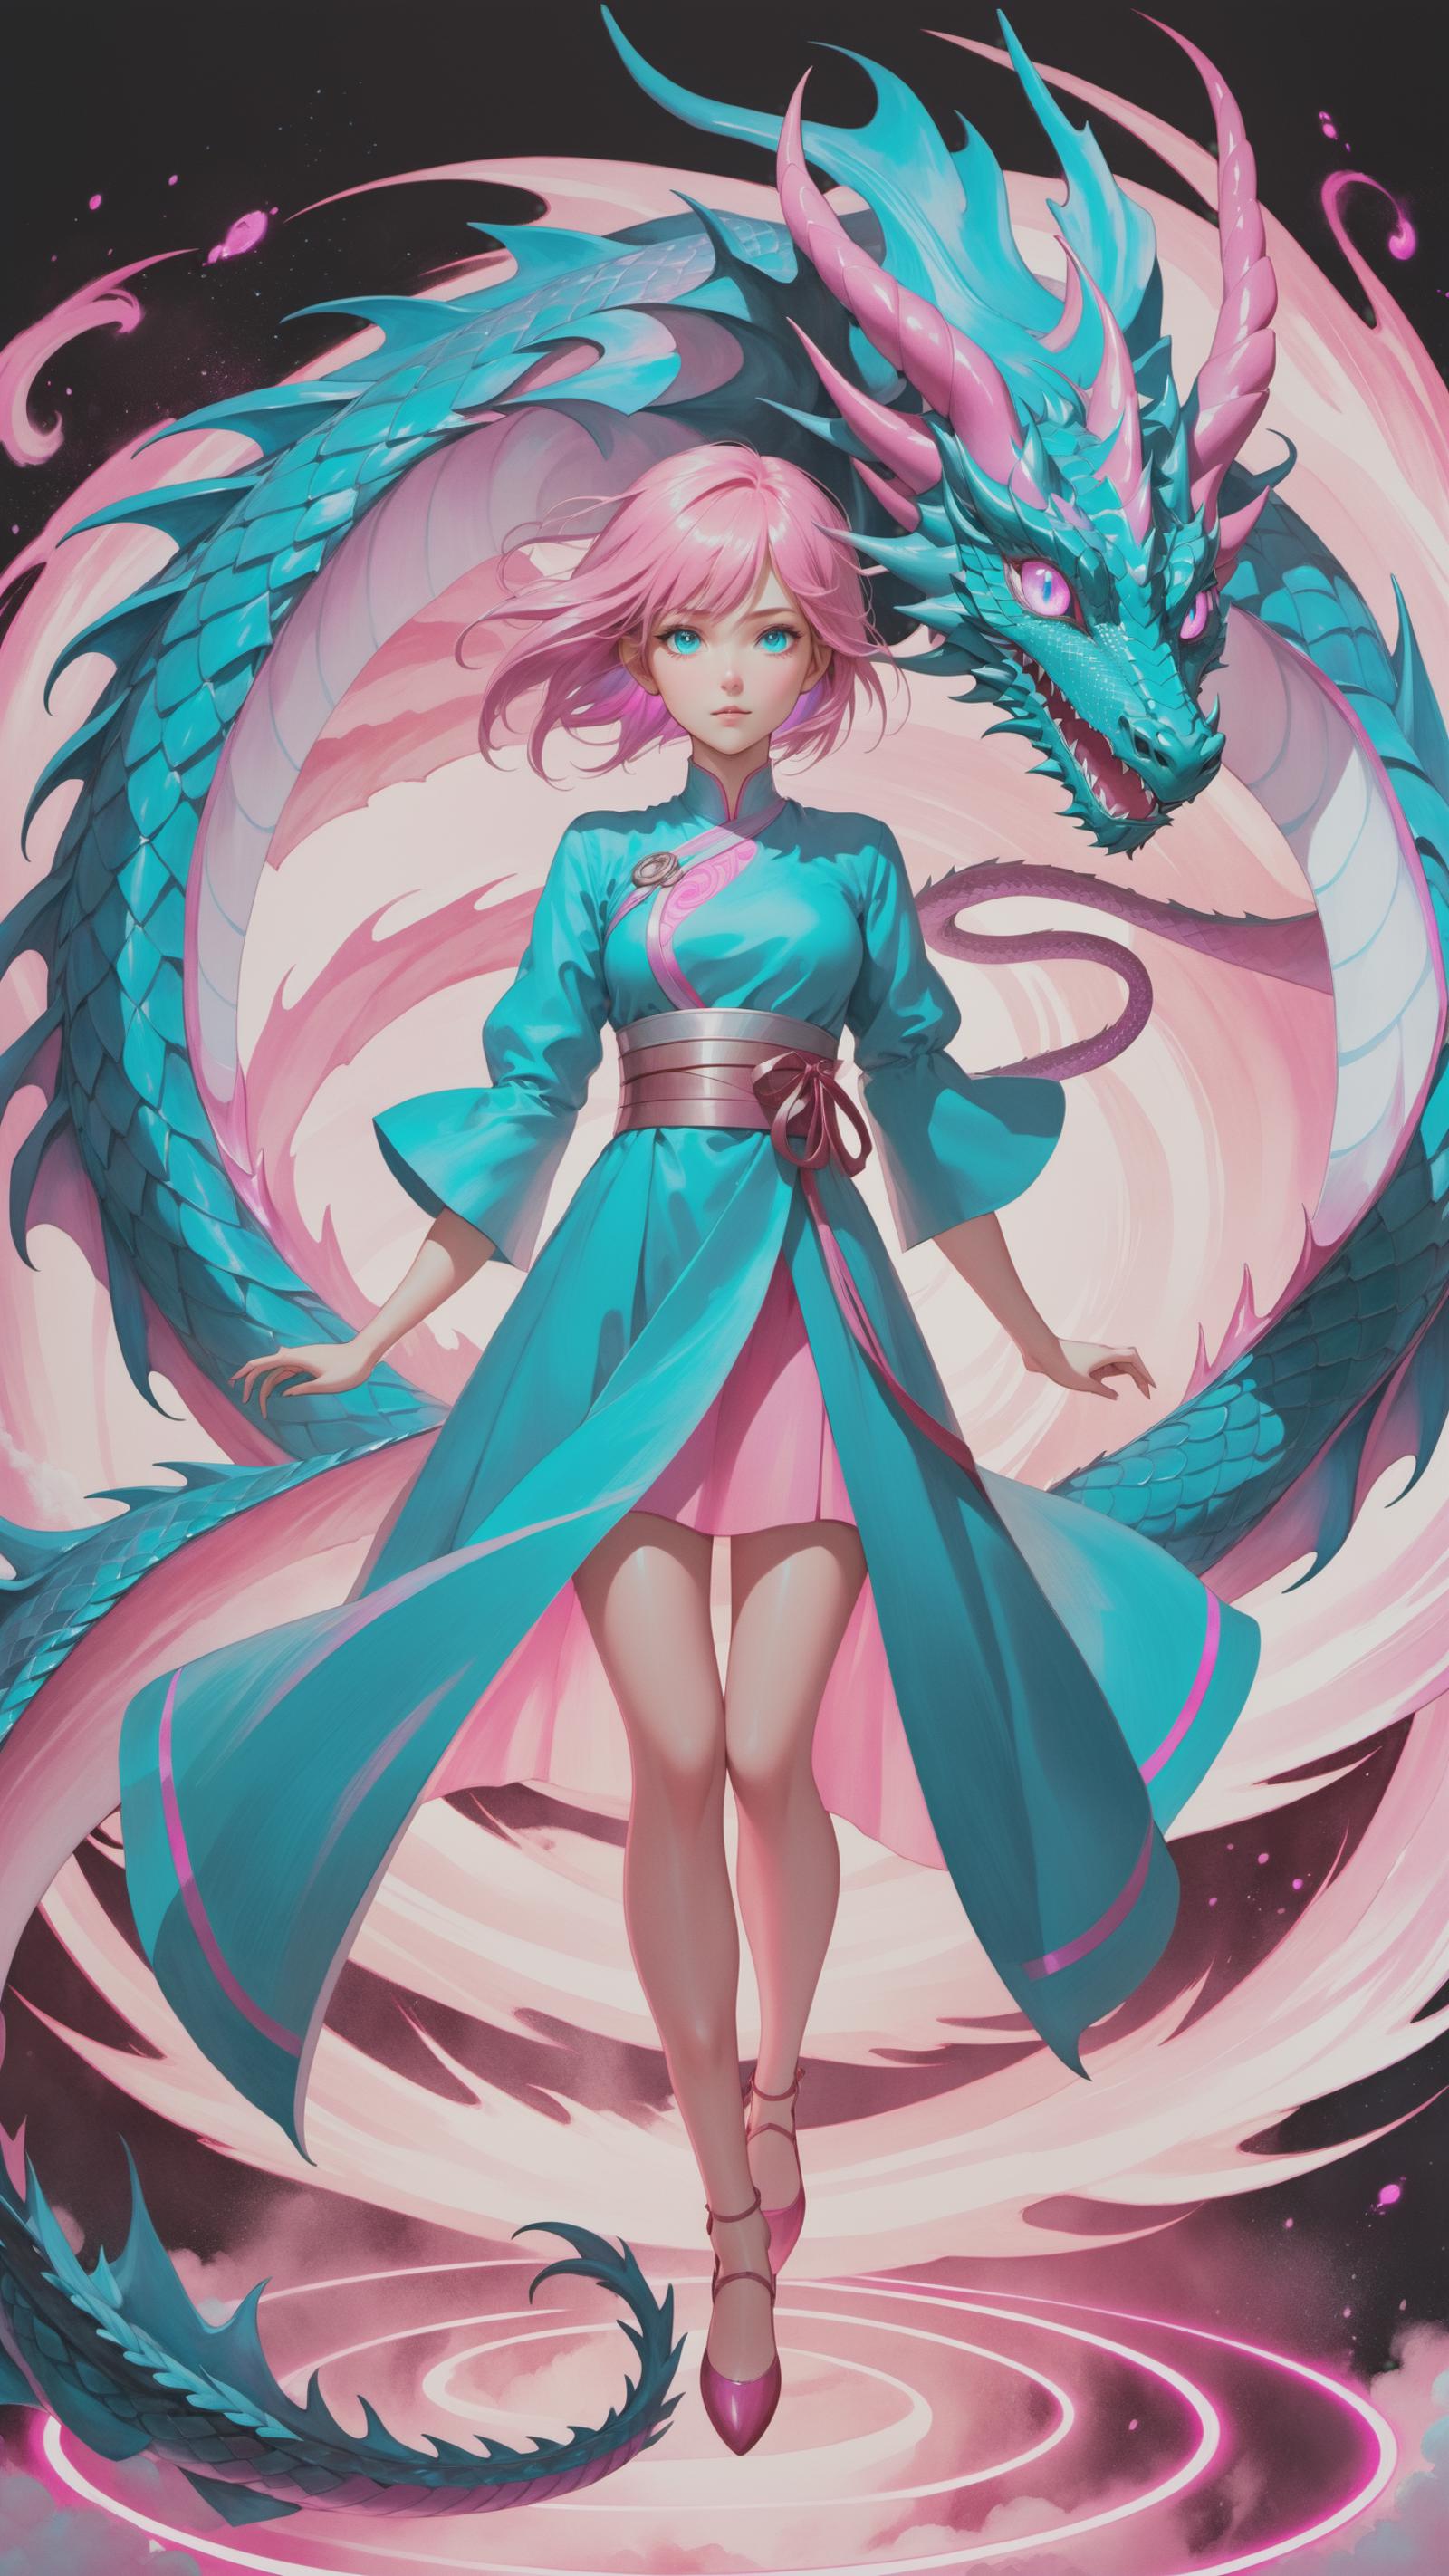 A woman in a blue dress standing next to a pink dragon.